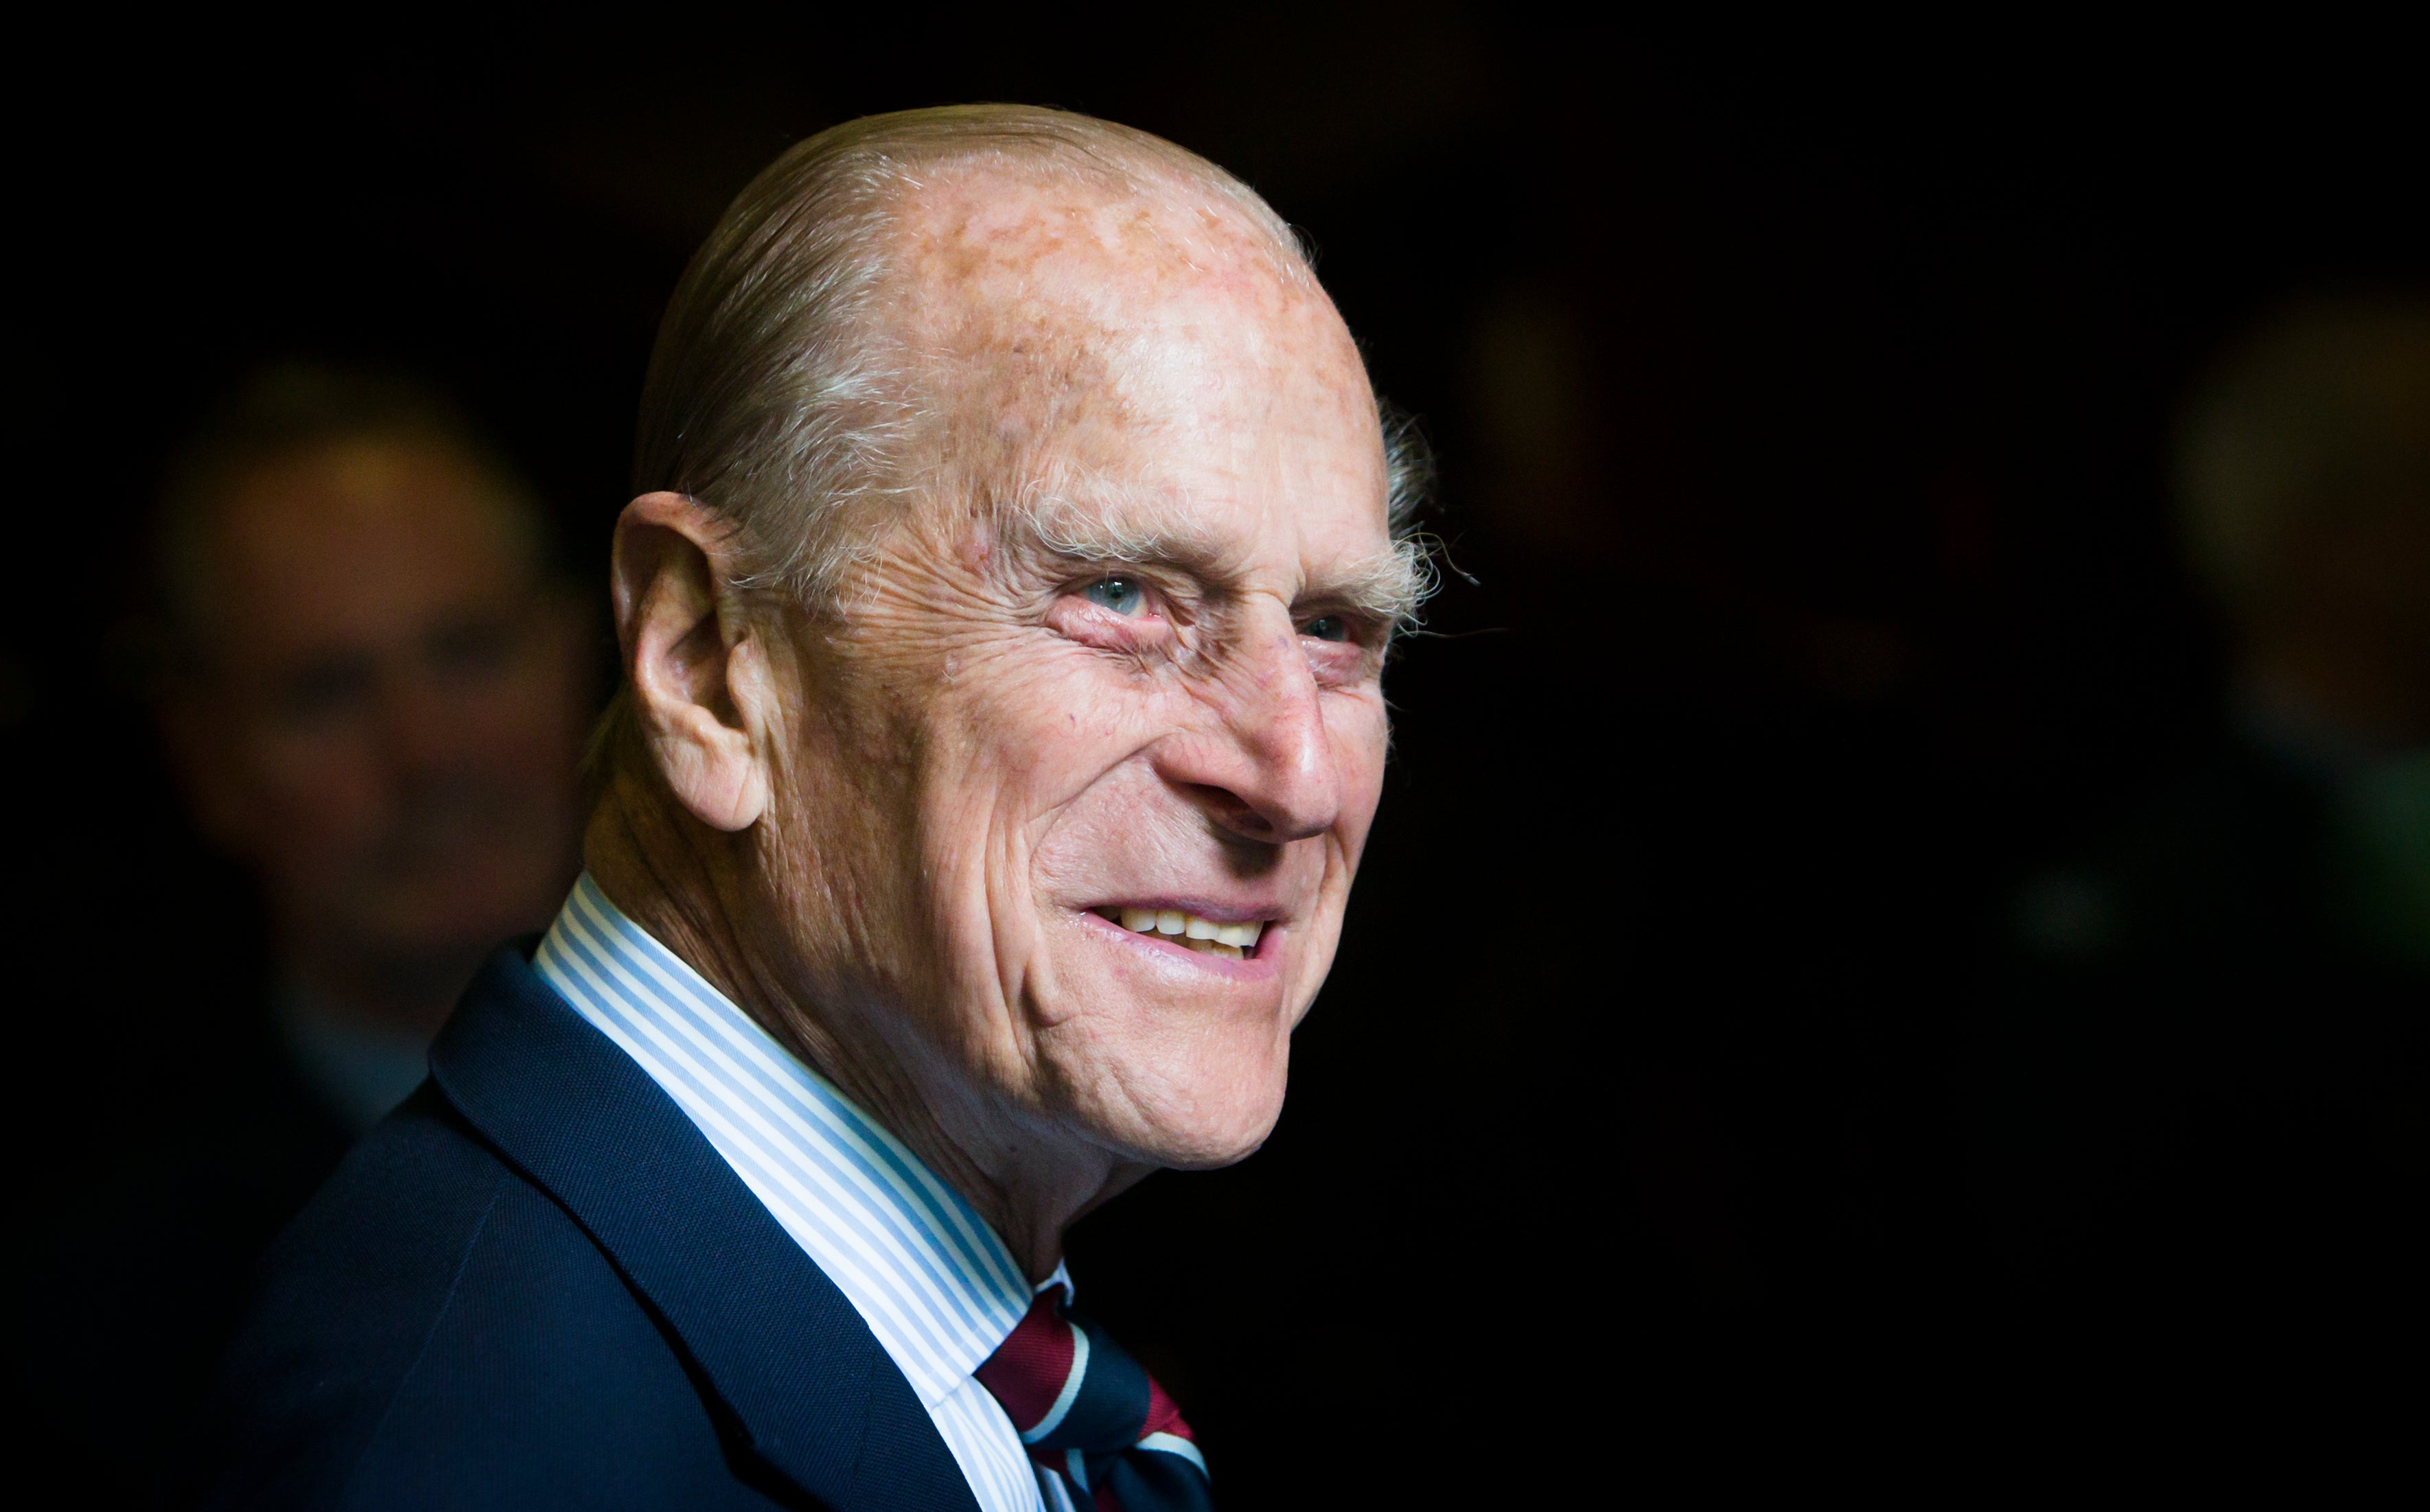 Prince Philip’s funeral will take place on Saturday at Windsor Castle